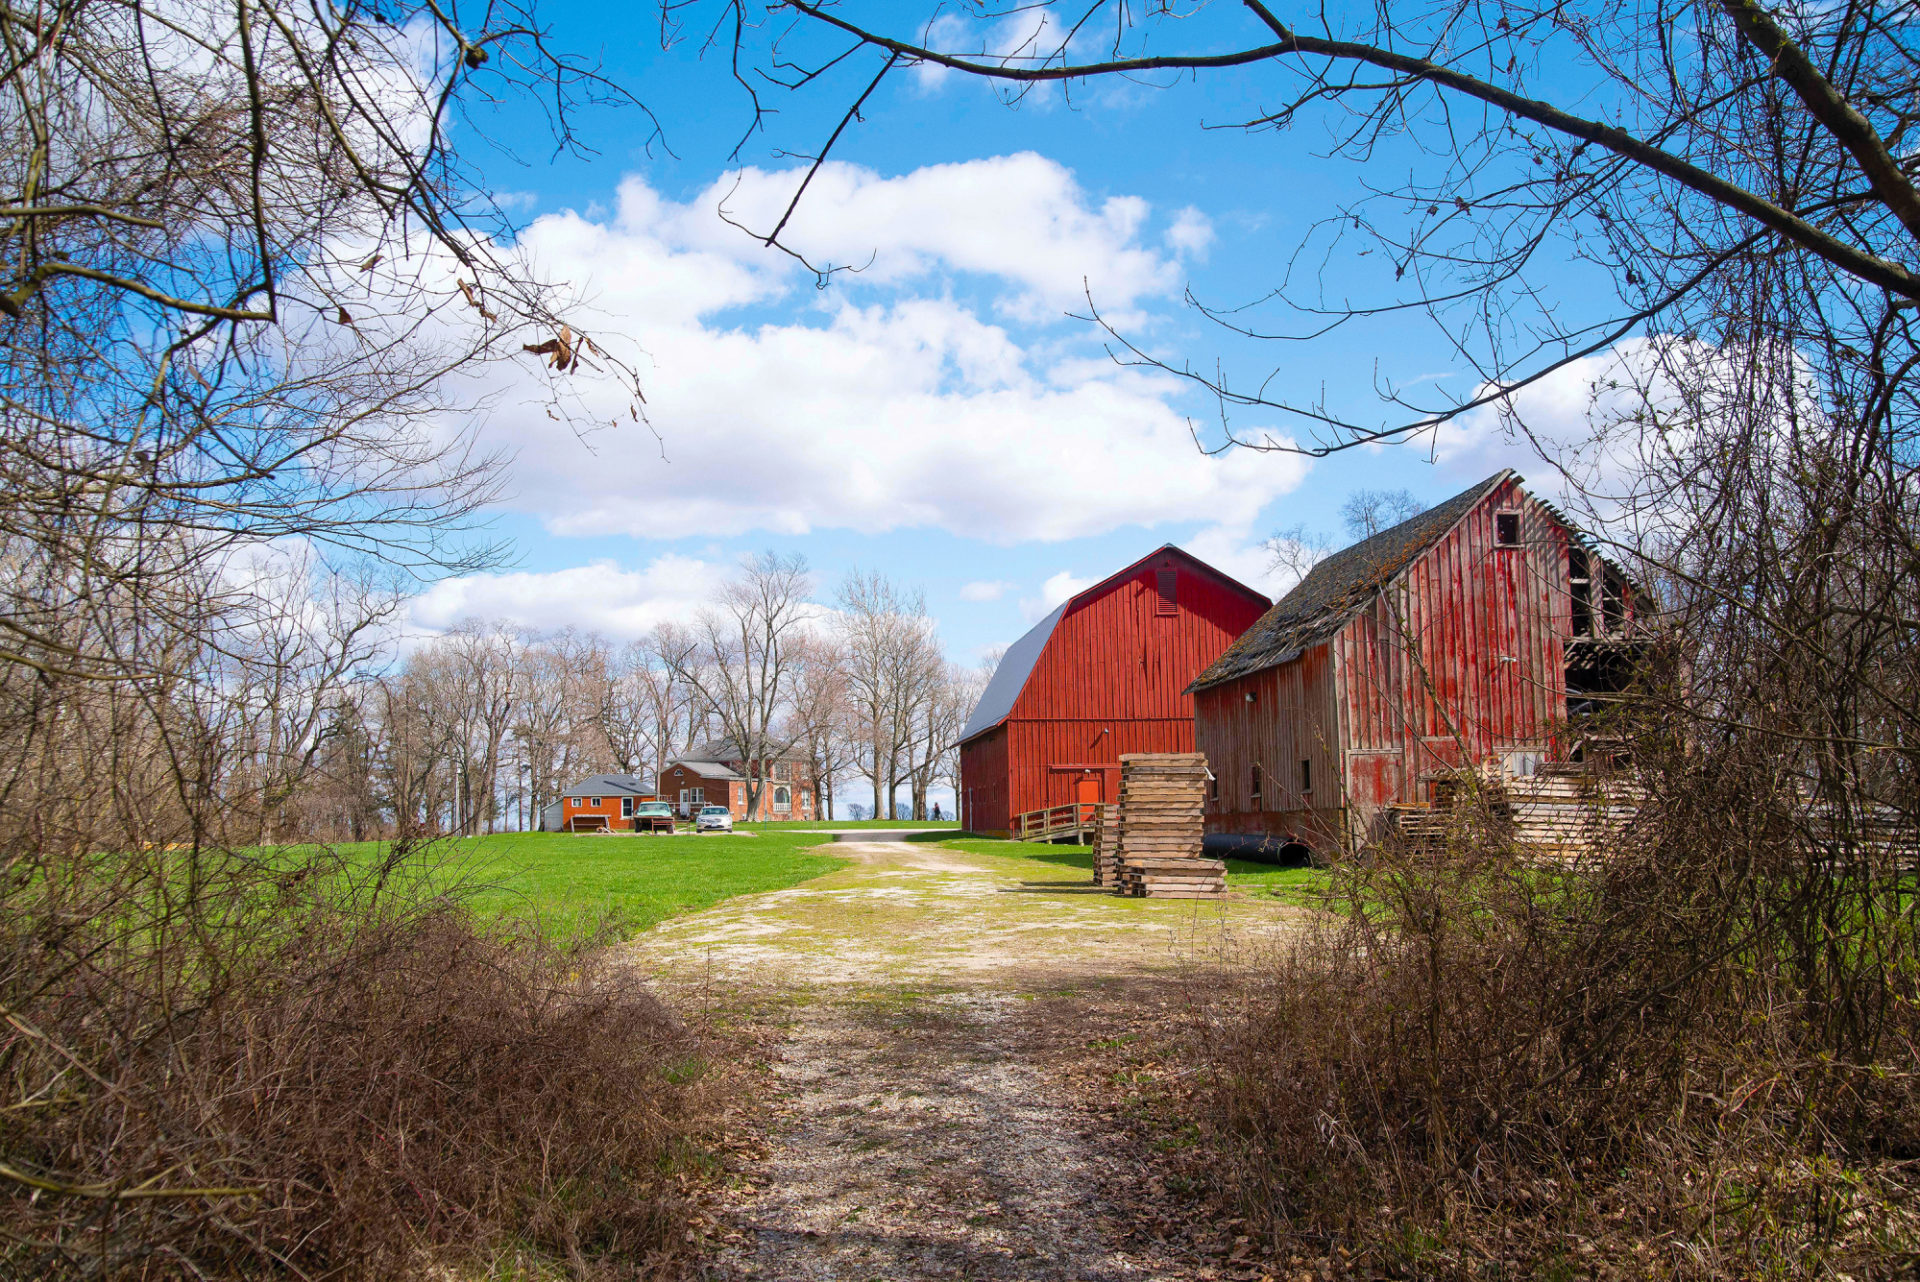 Photo of the red barn at Allerton Parkin Monticello, IL. A dirt pathway is in the middle of the image, in the middle ground on the right is a red barn. There is green grass on the left. The sky is bright blue with puffy clouds.